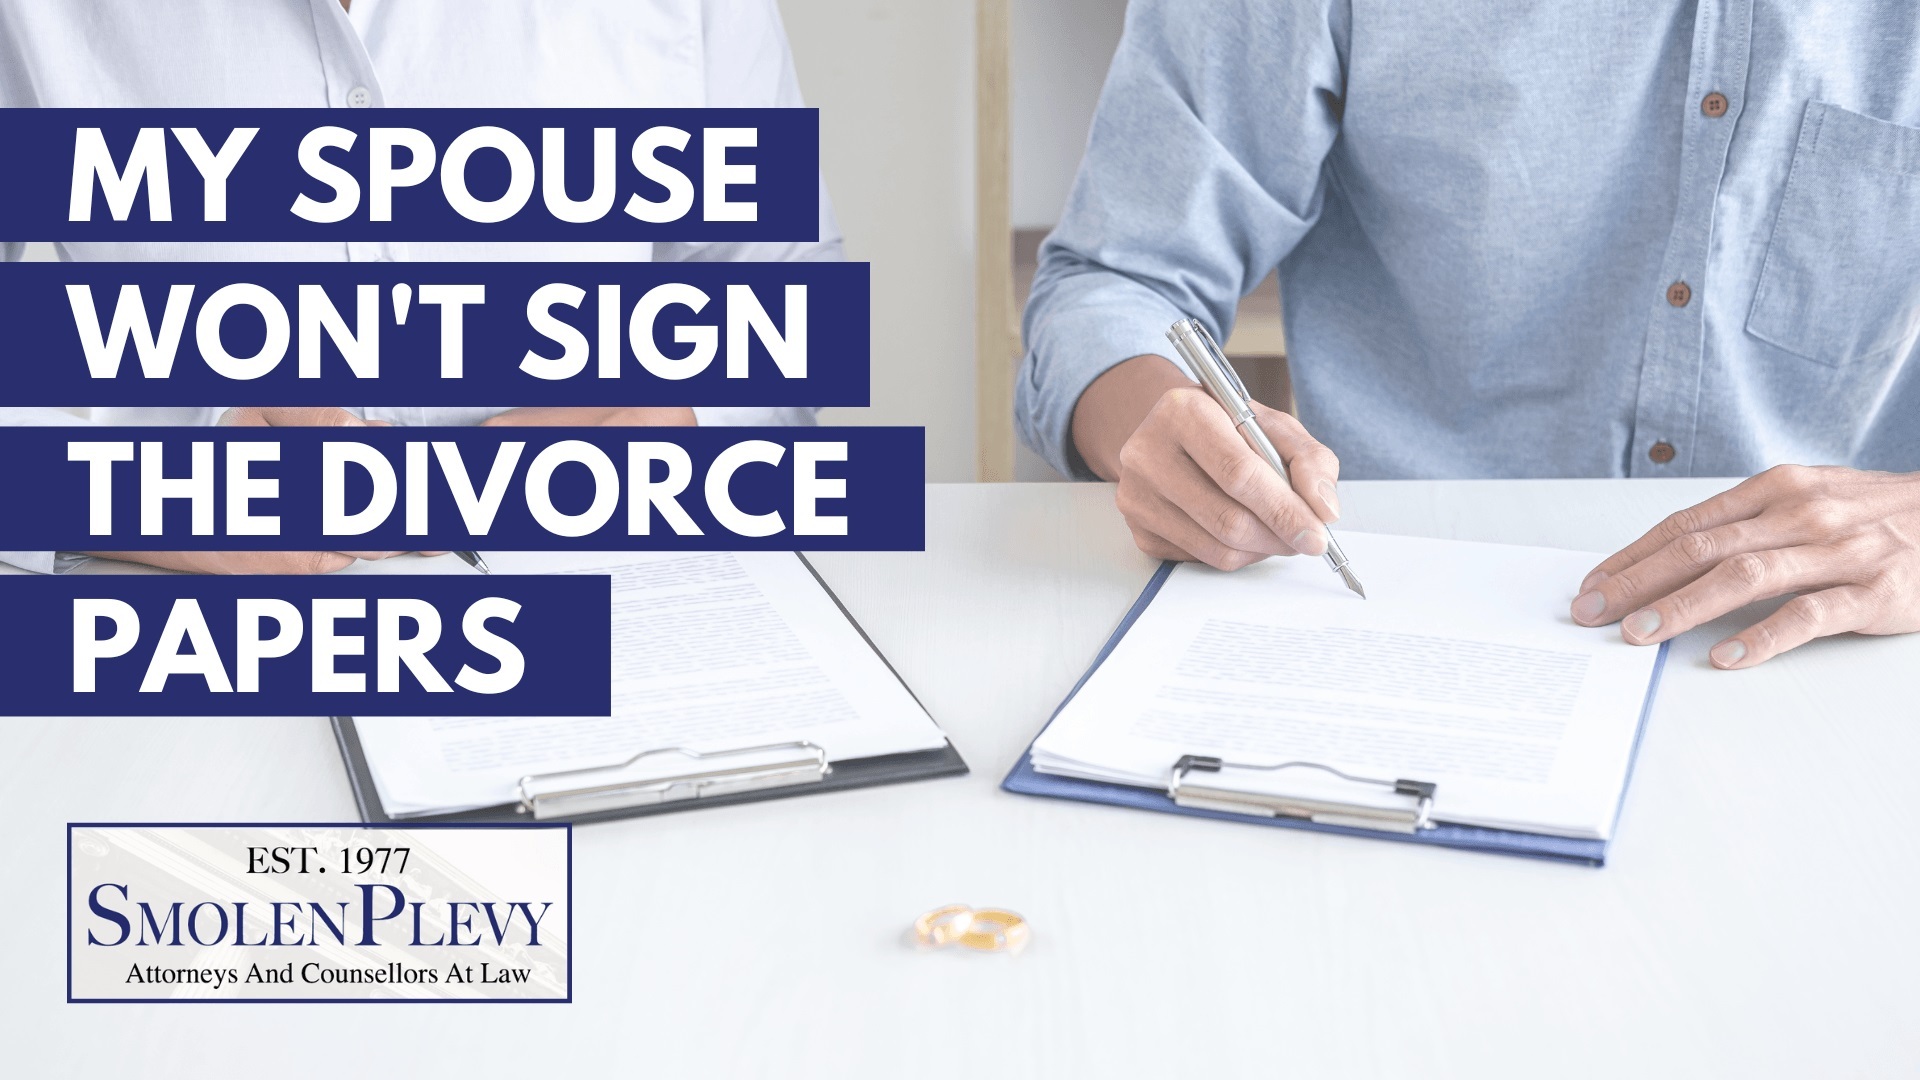 What do I do if my spouse won't sign the divorce papers?